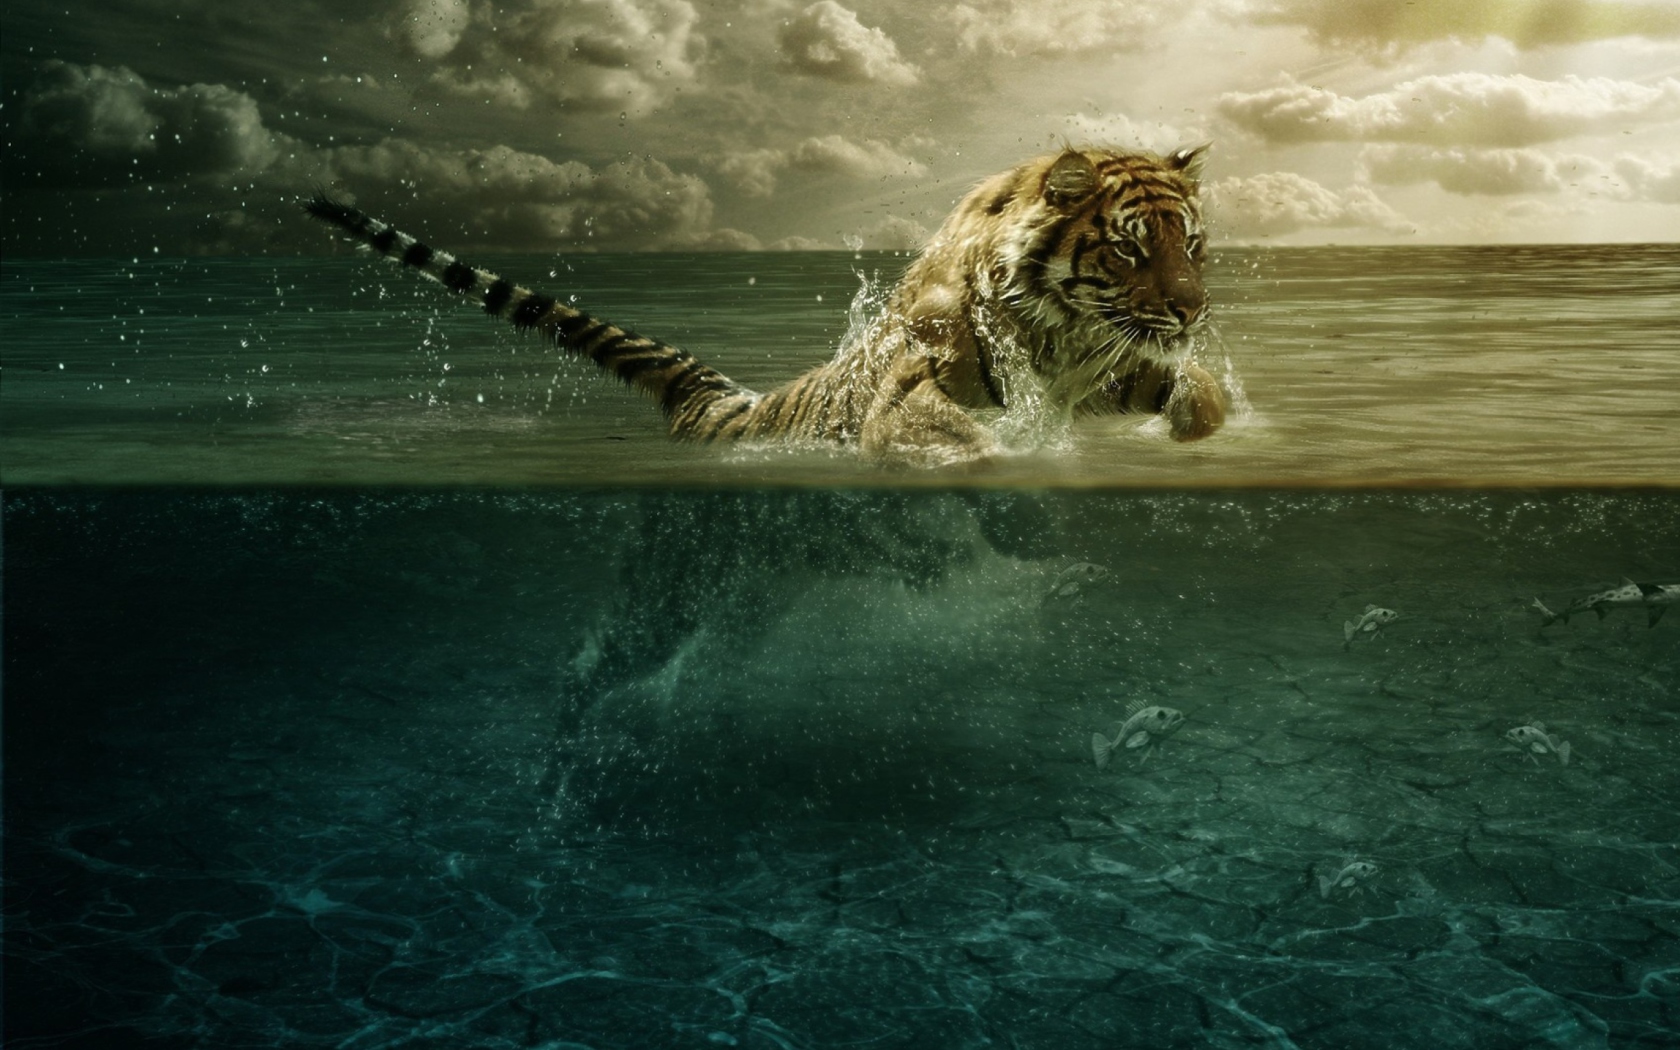 Tiger Jumping In Water wallpaper 1680x1050